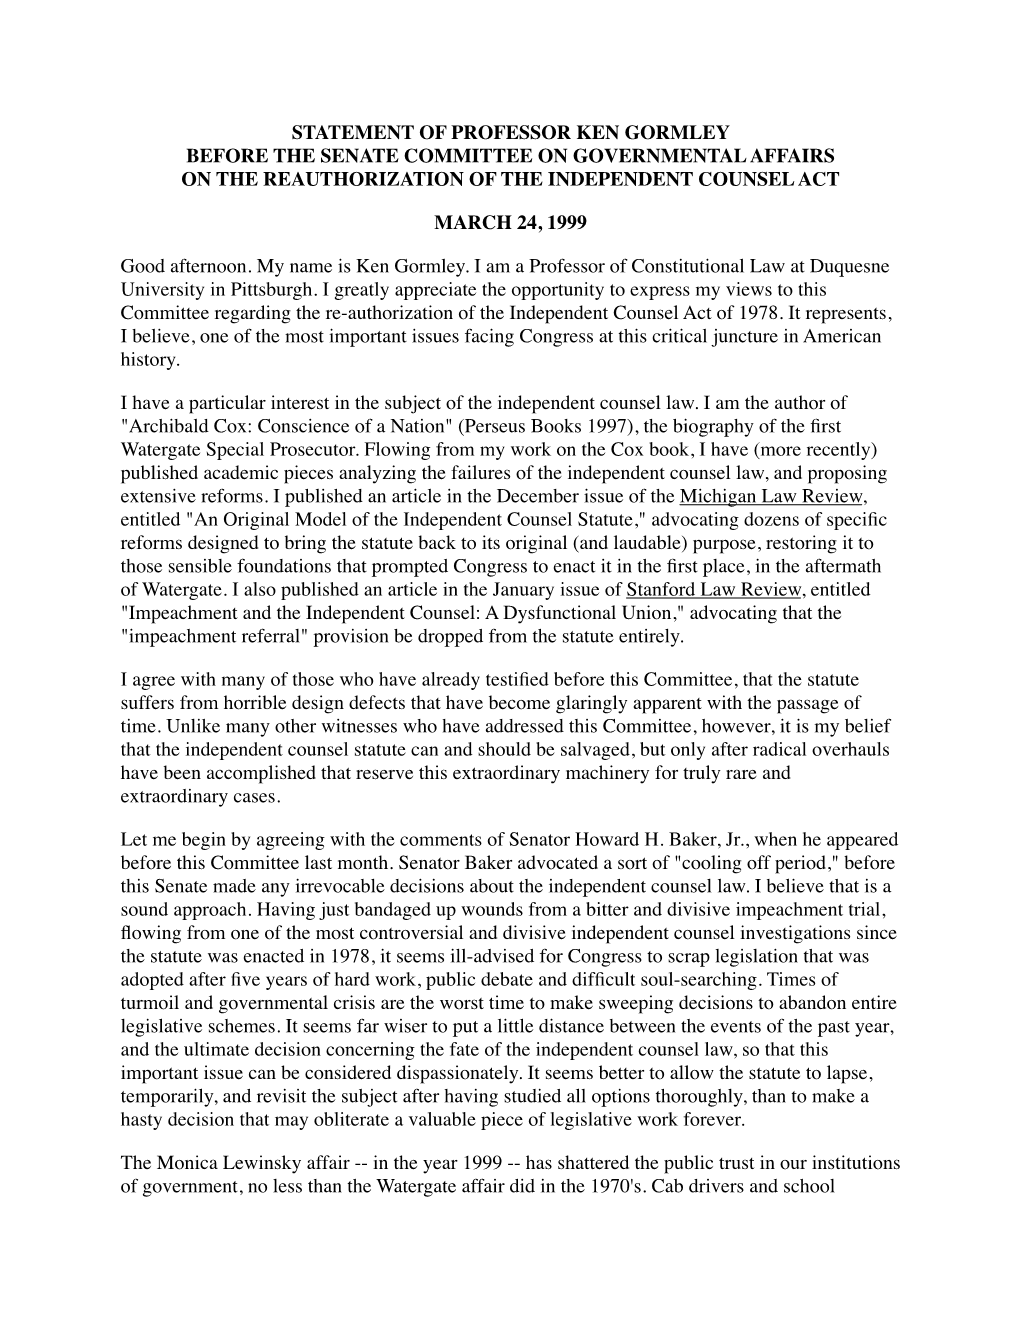 Statement of Professor Ken Gormley Before the Senate Committee on Governmental Affairs on the Reauthorization of the Independent Counsel Act